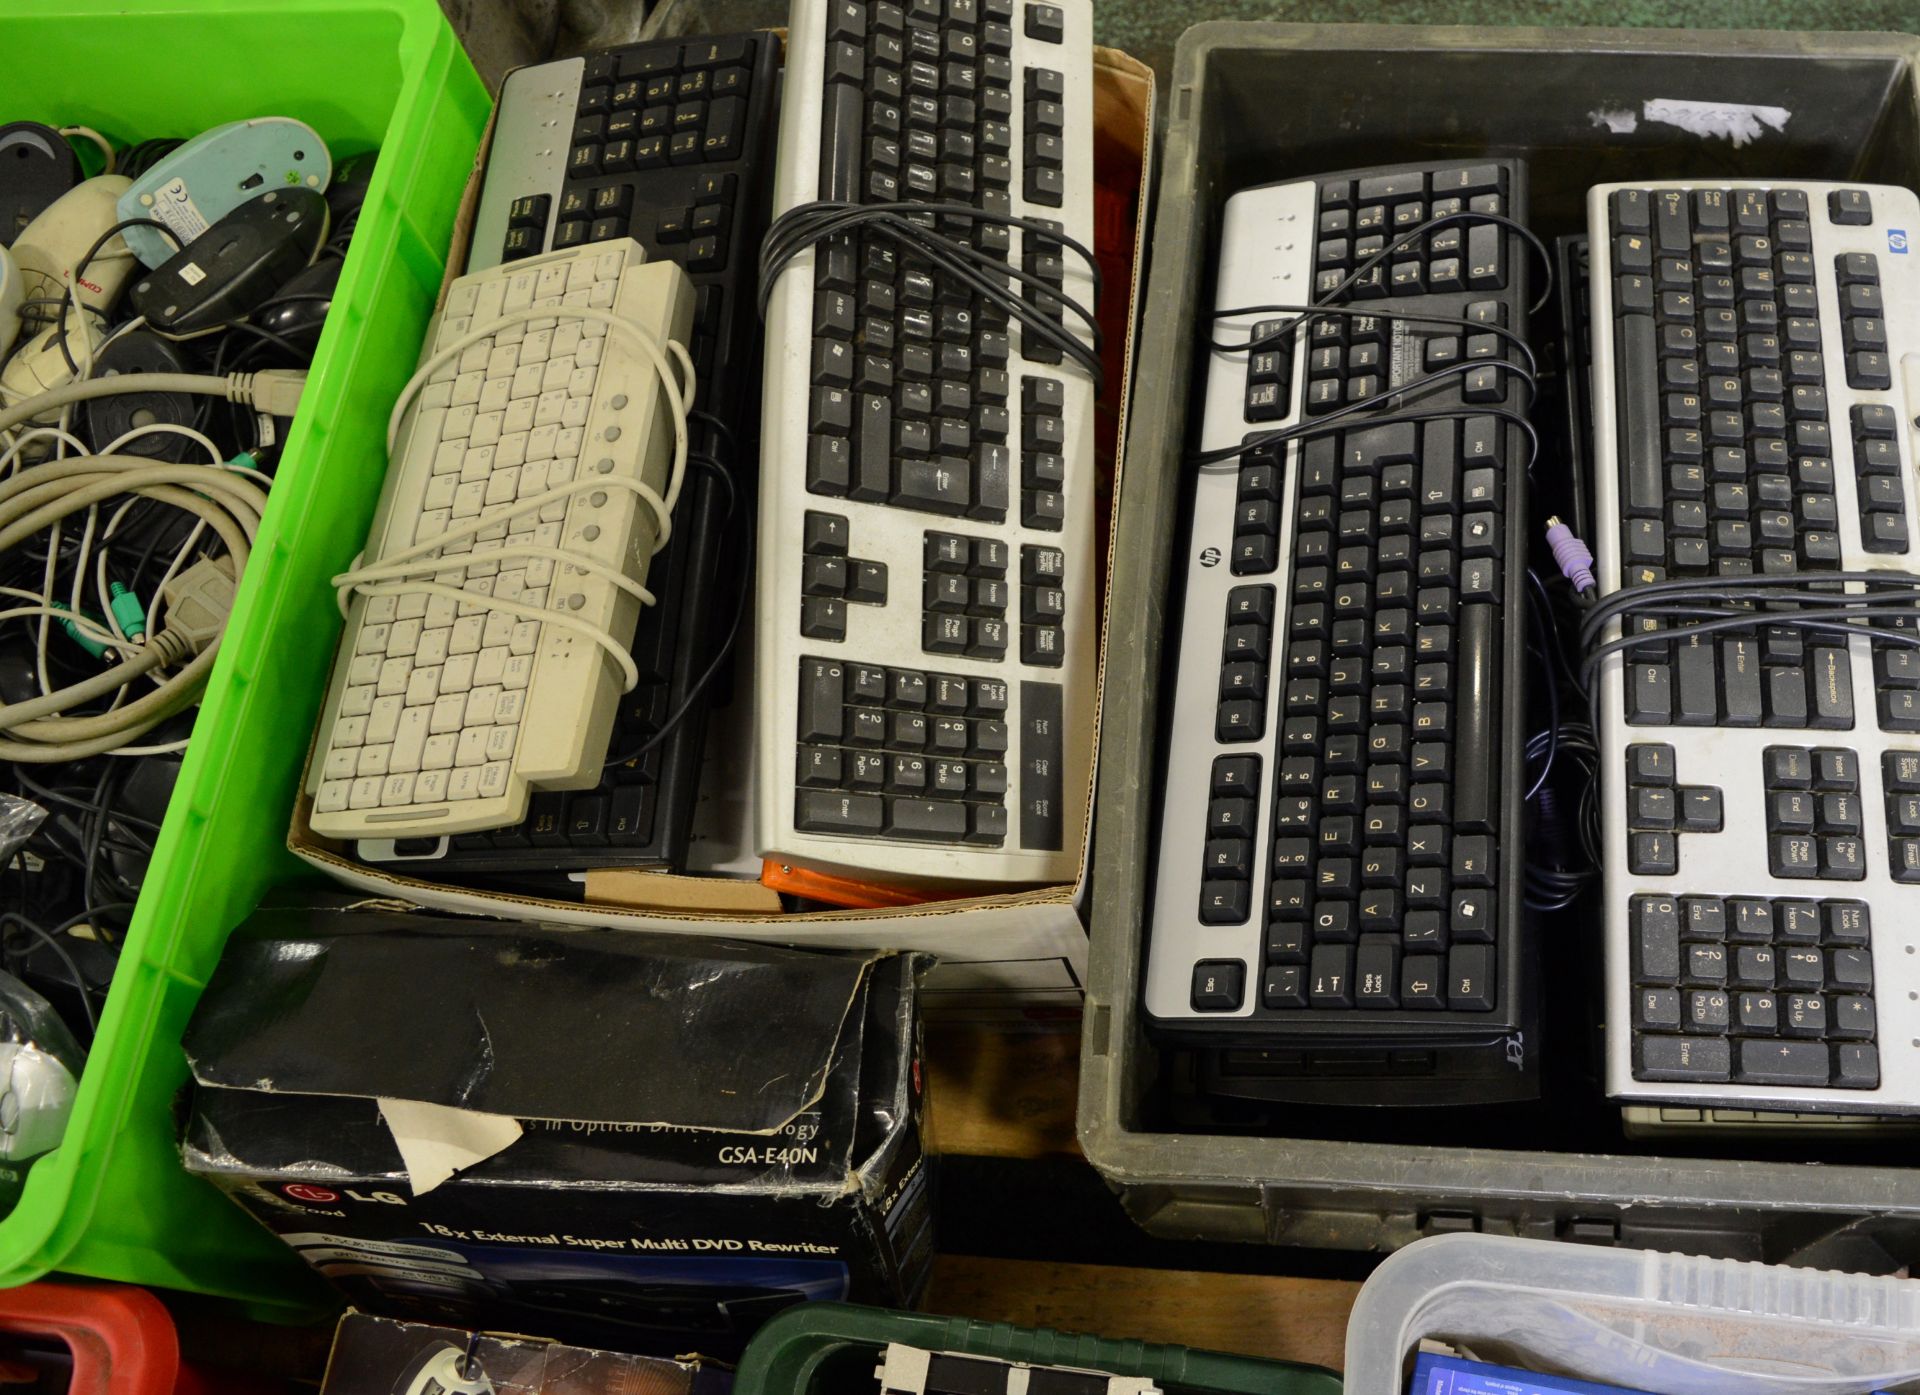 Pallet of Computer Peripherals inc Keyboards, Mice, Joystick, Hard Drives. - Image 3 of 5